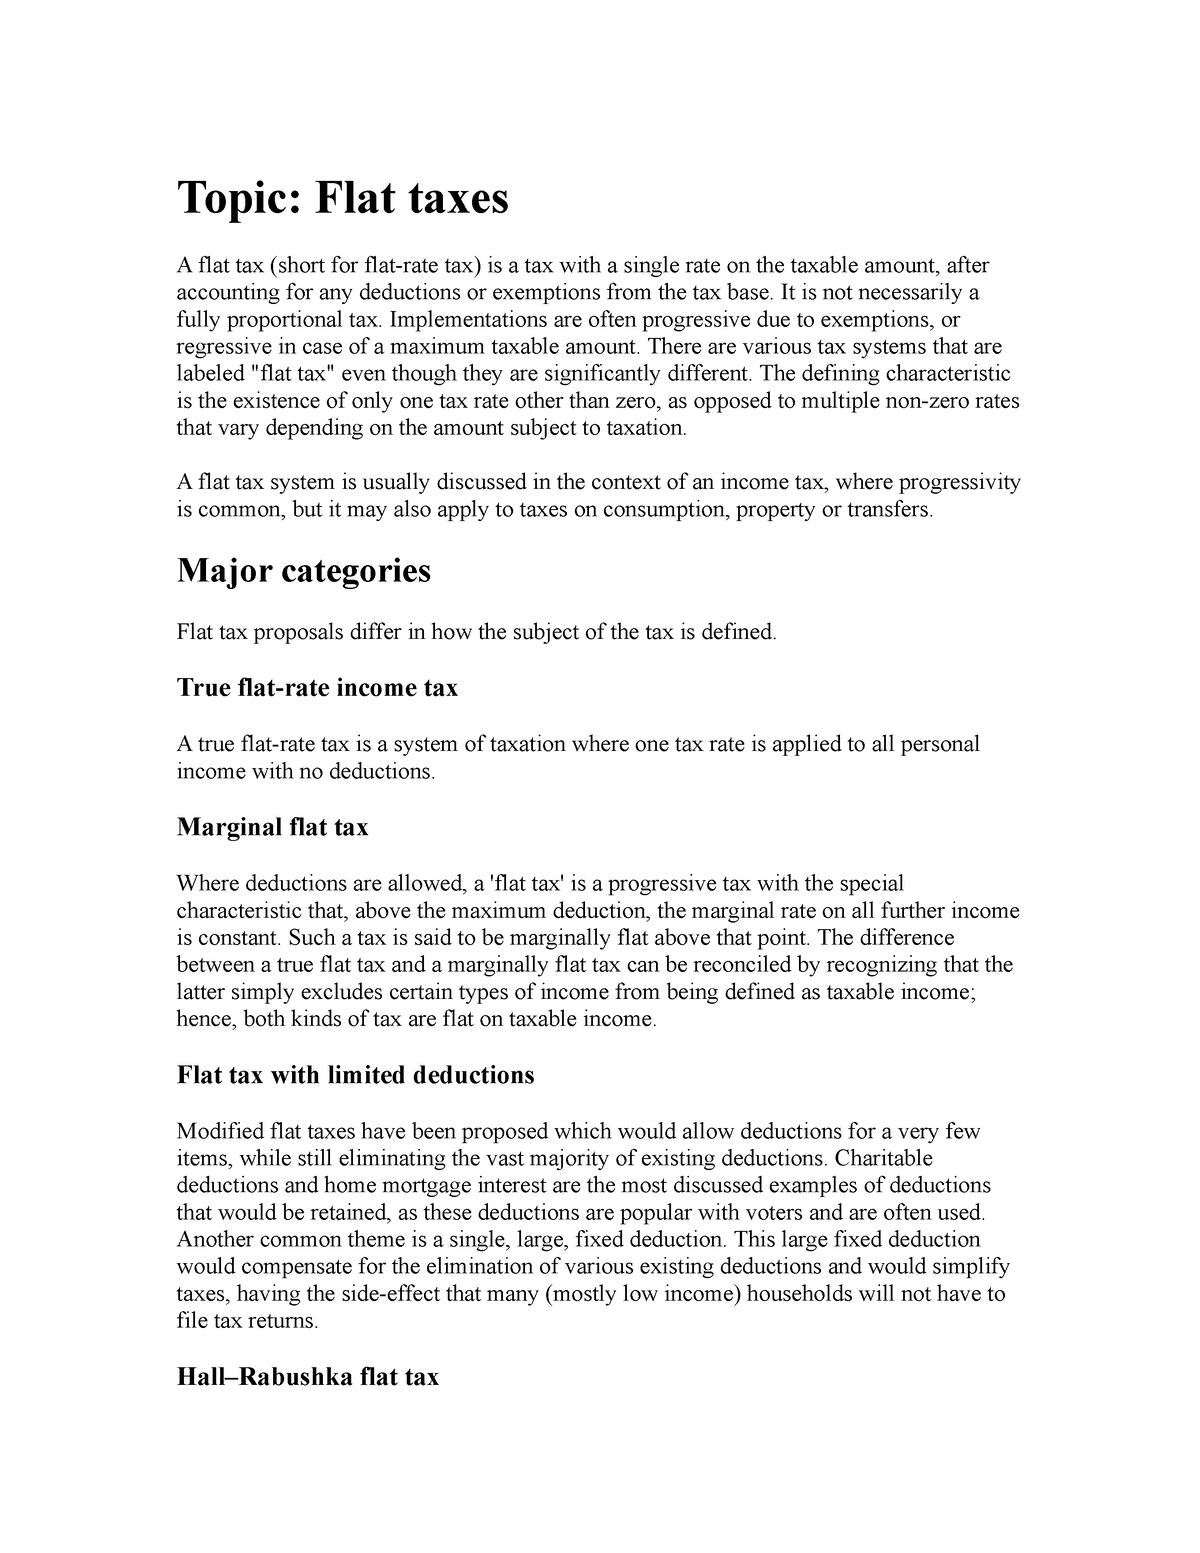 Flat taxes A flat tax (short for flatrate tax) is a tax with a